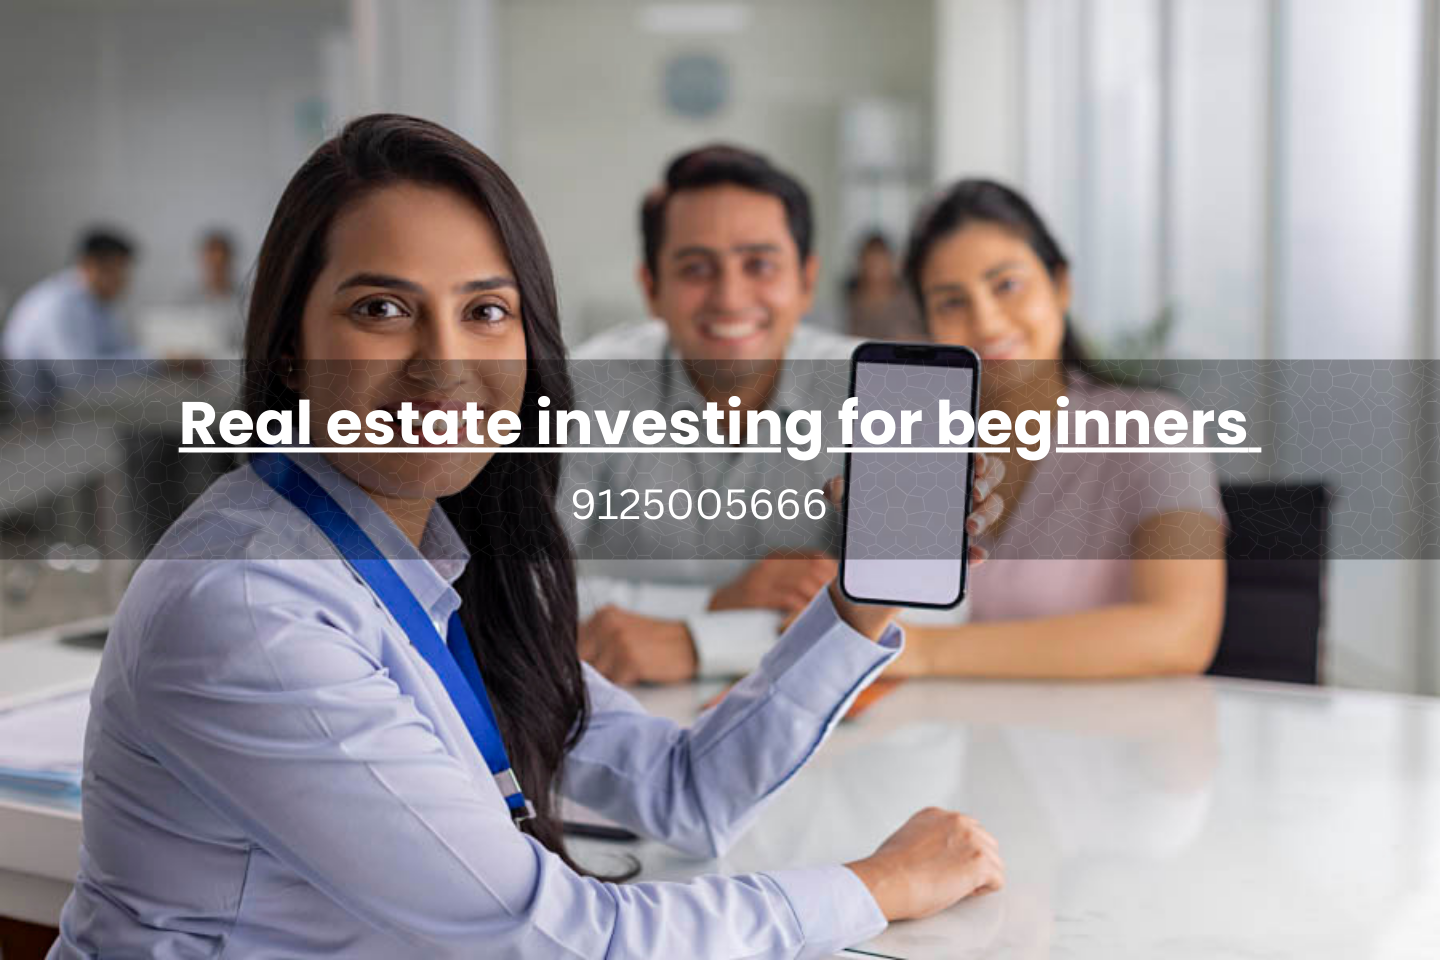 Real estate investing for beginners in lucknow